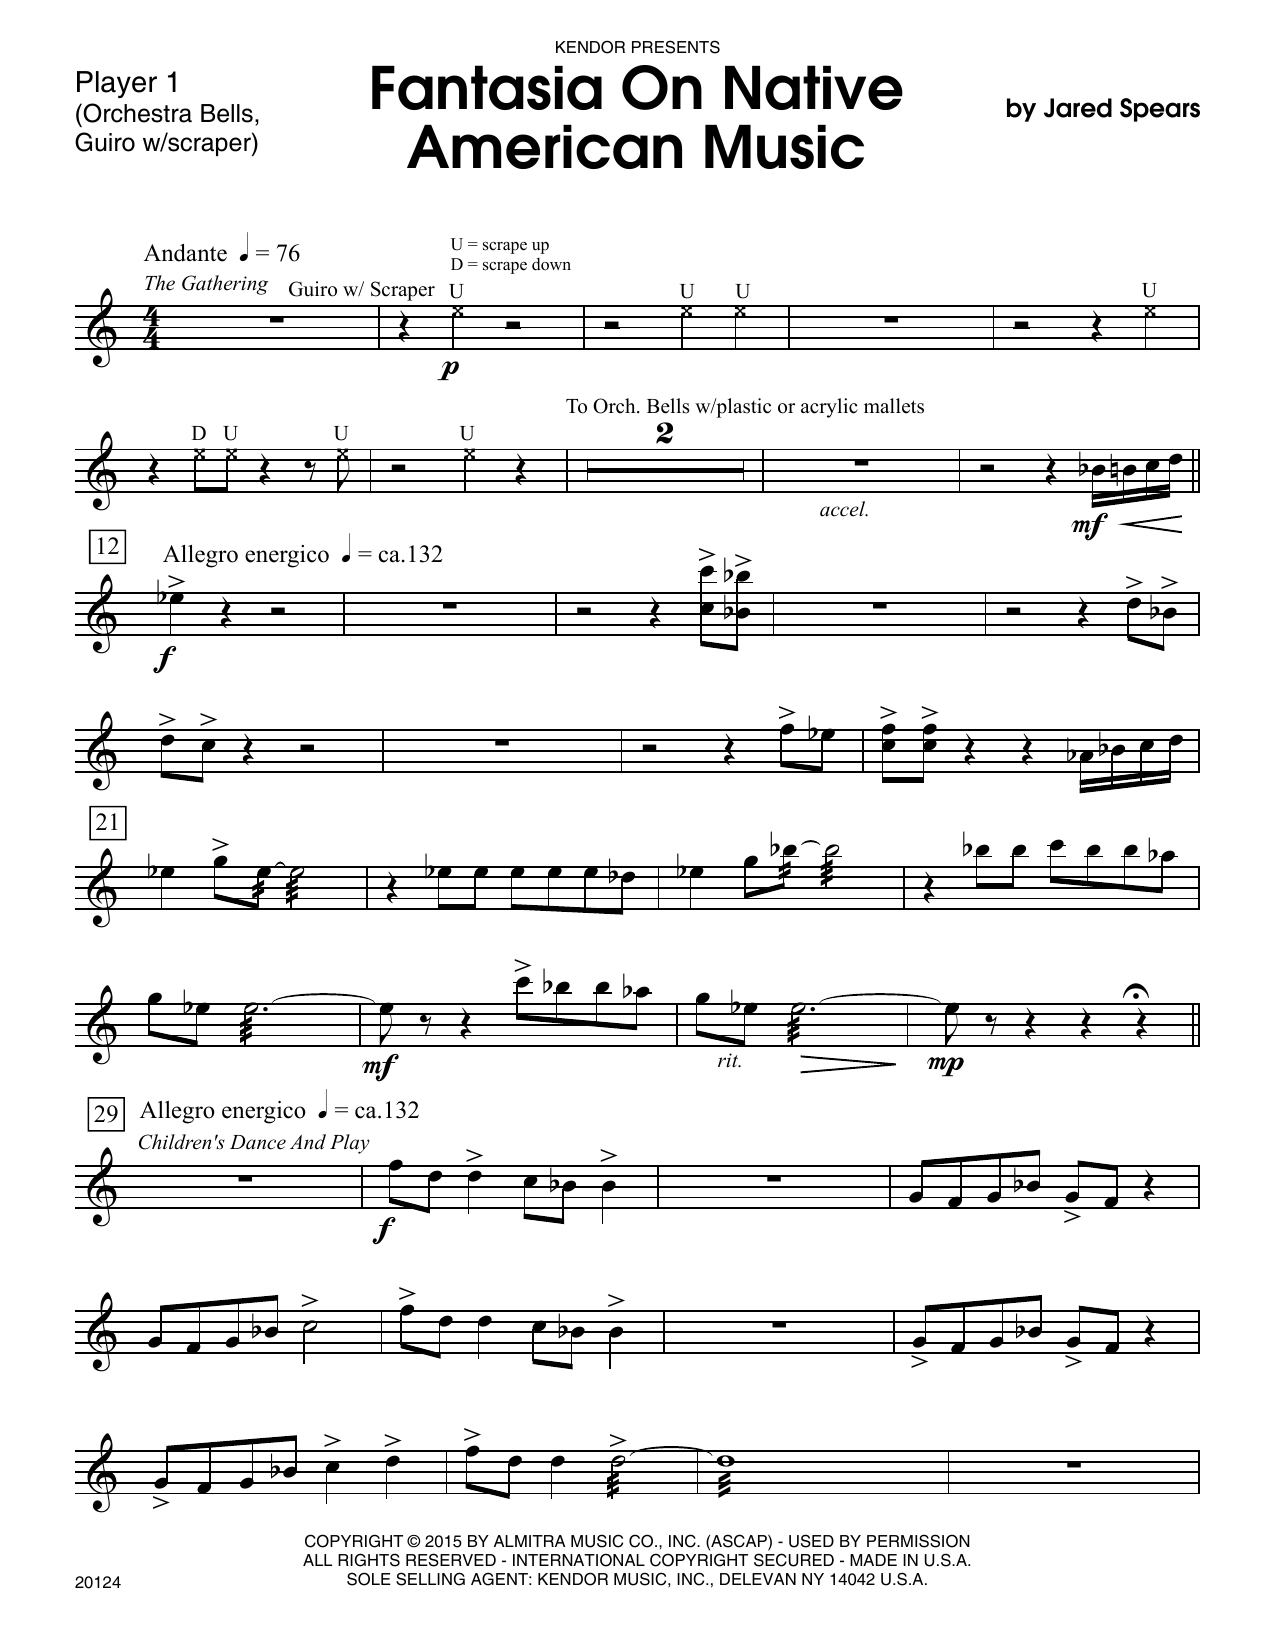 Download Jared Spears Fantasia On Native American Music - Per Sheet Music